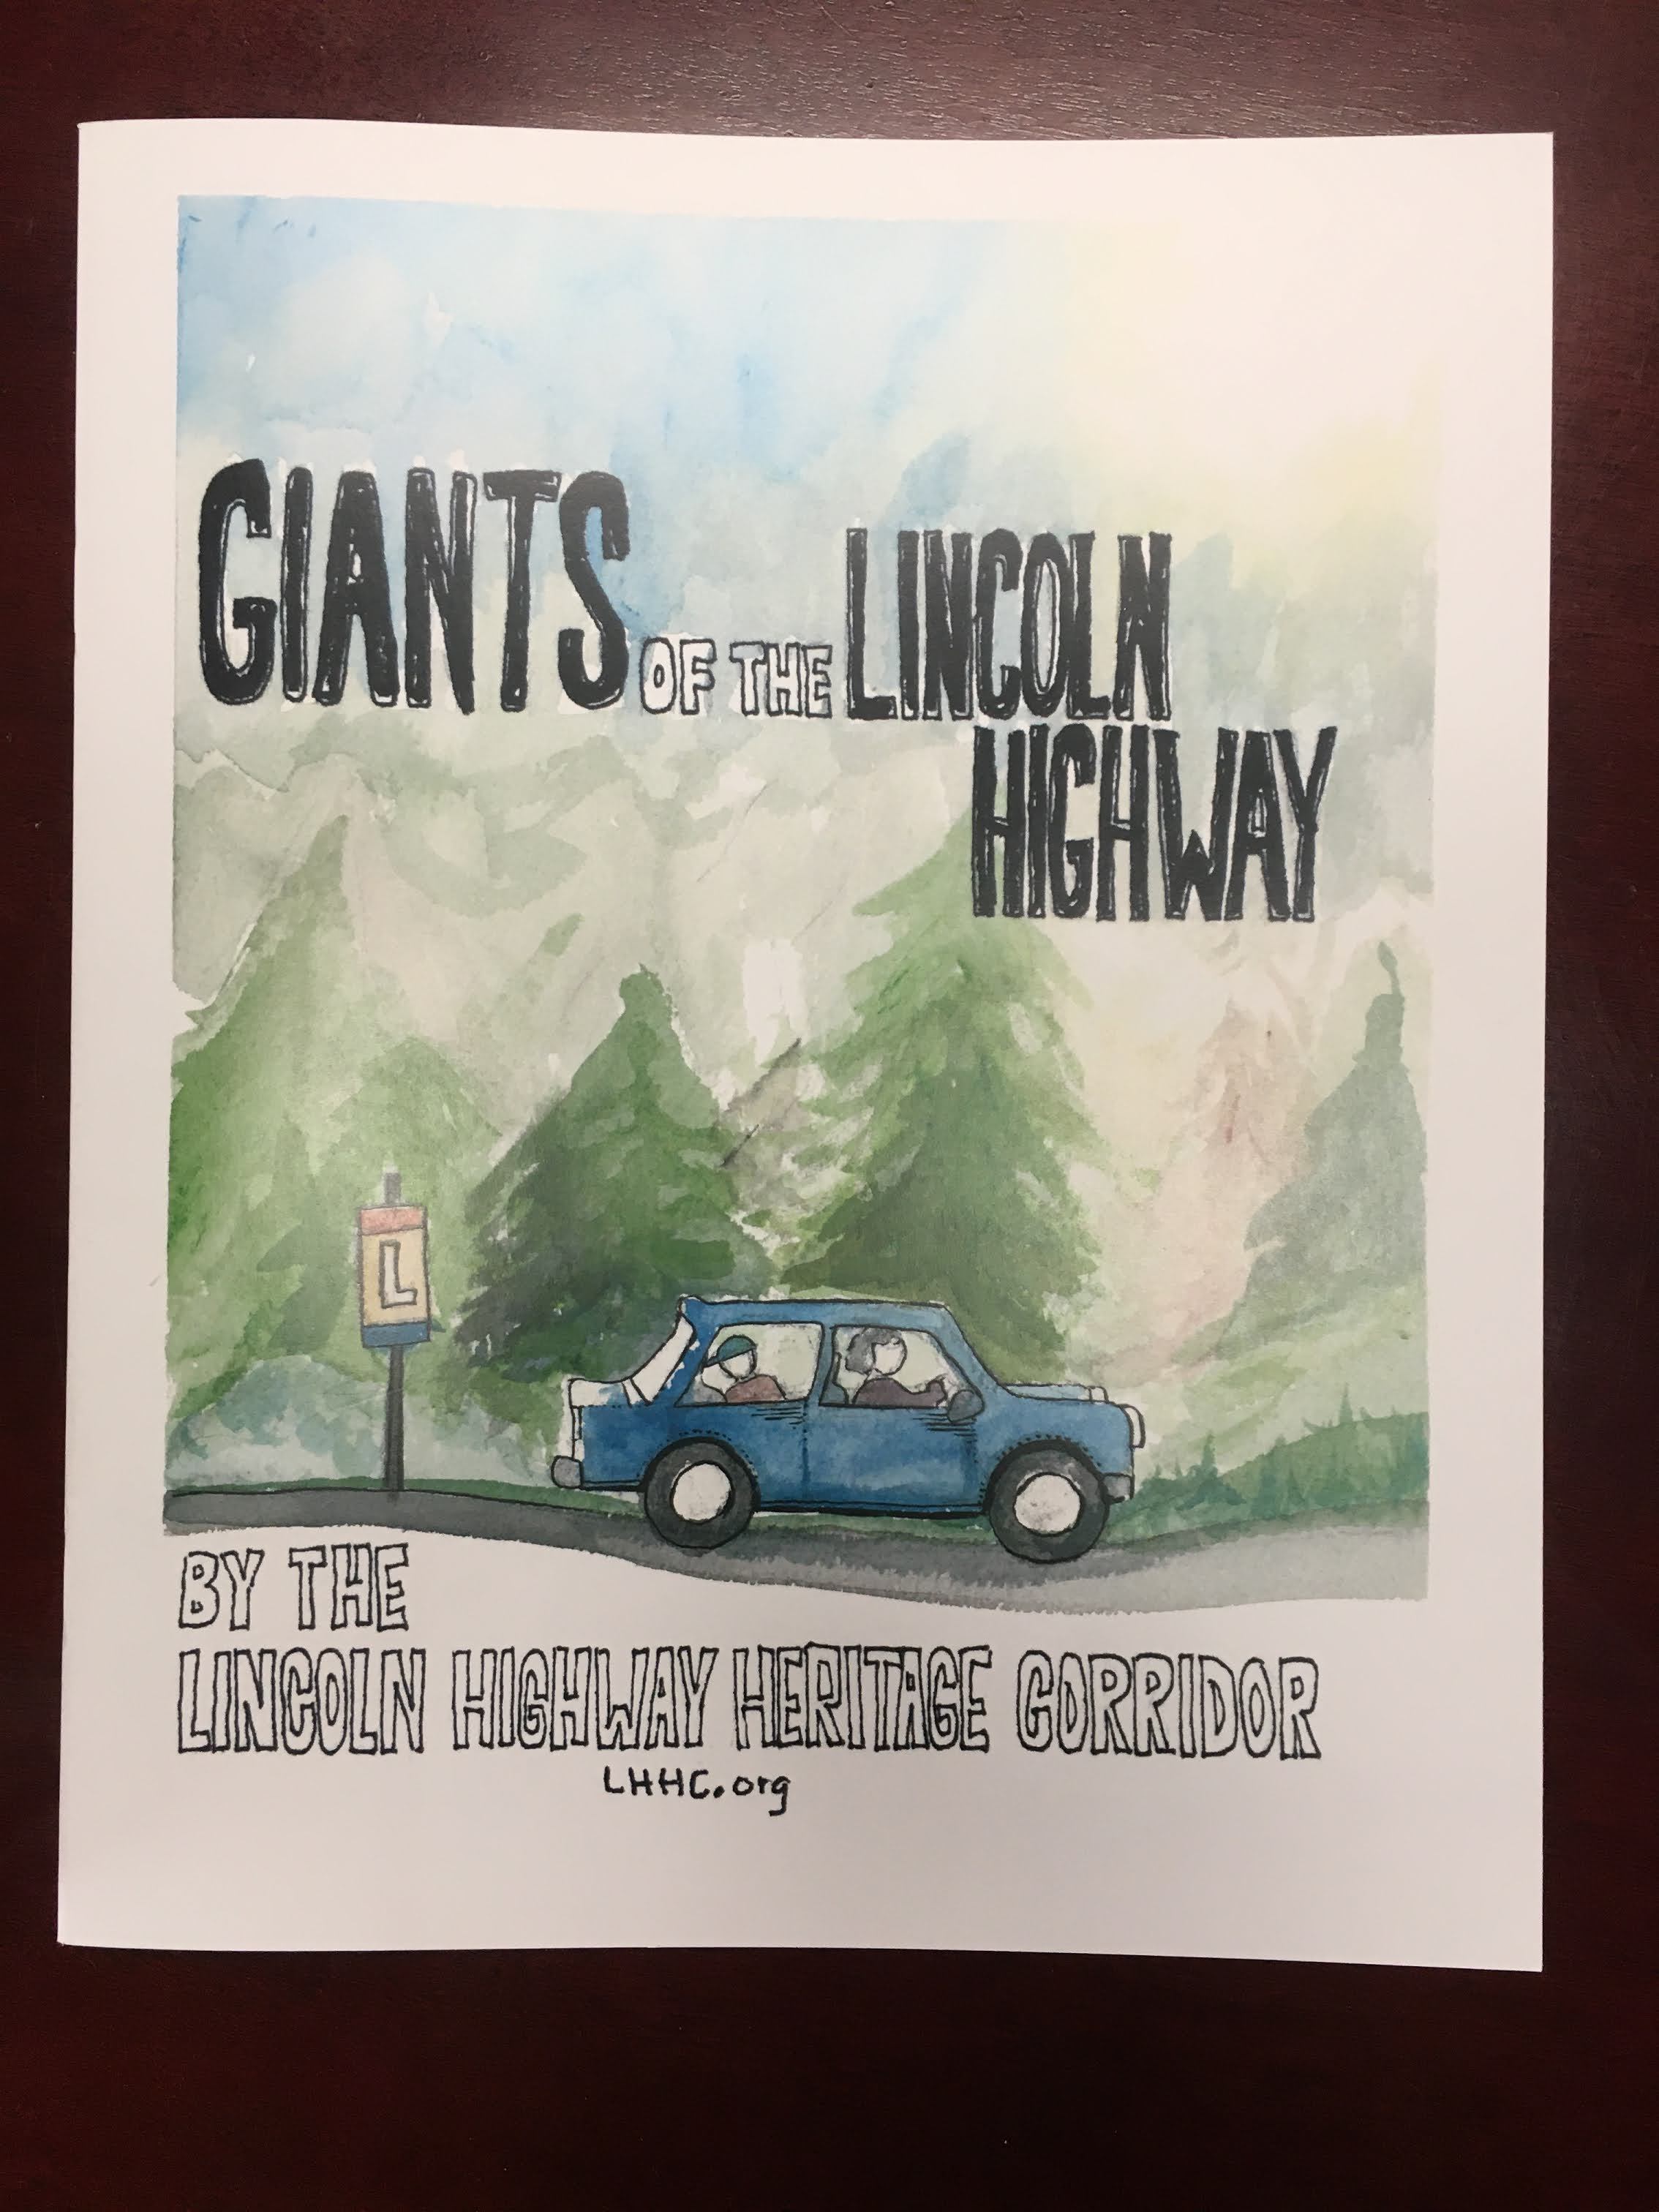 "Giants of the Lincoln Highway"